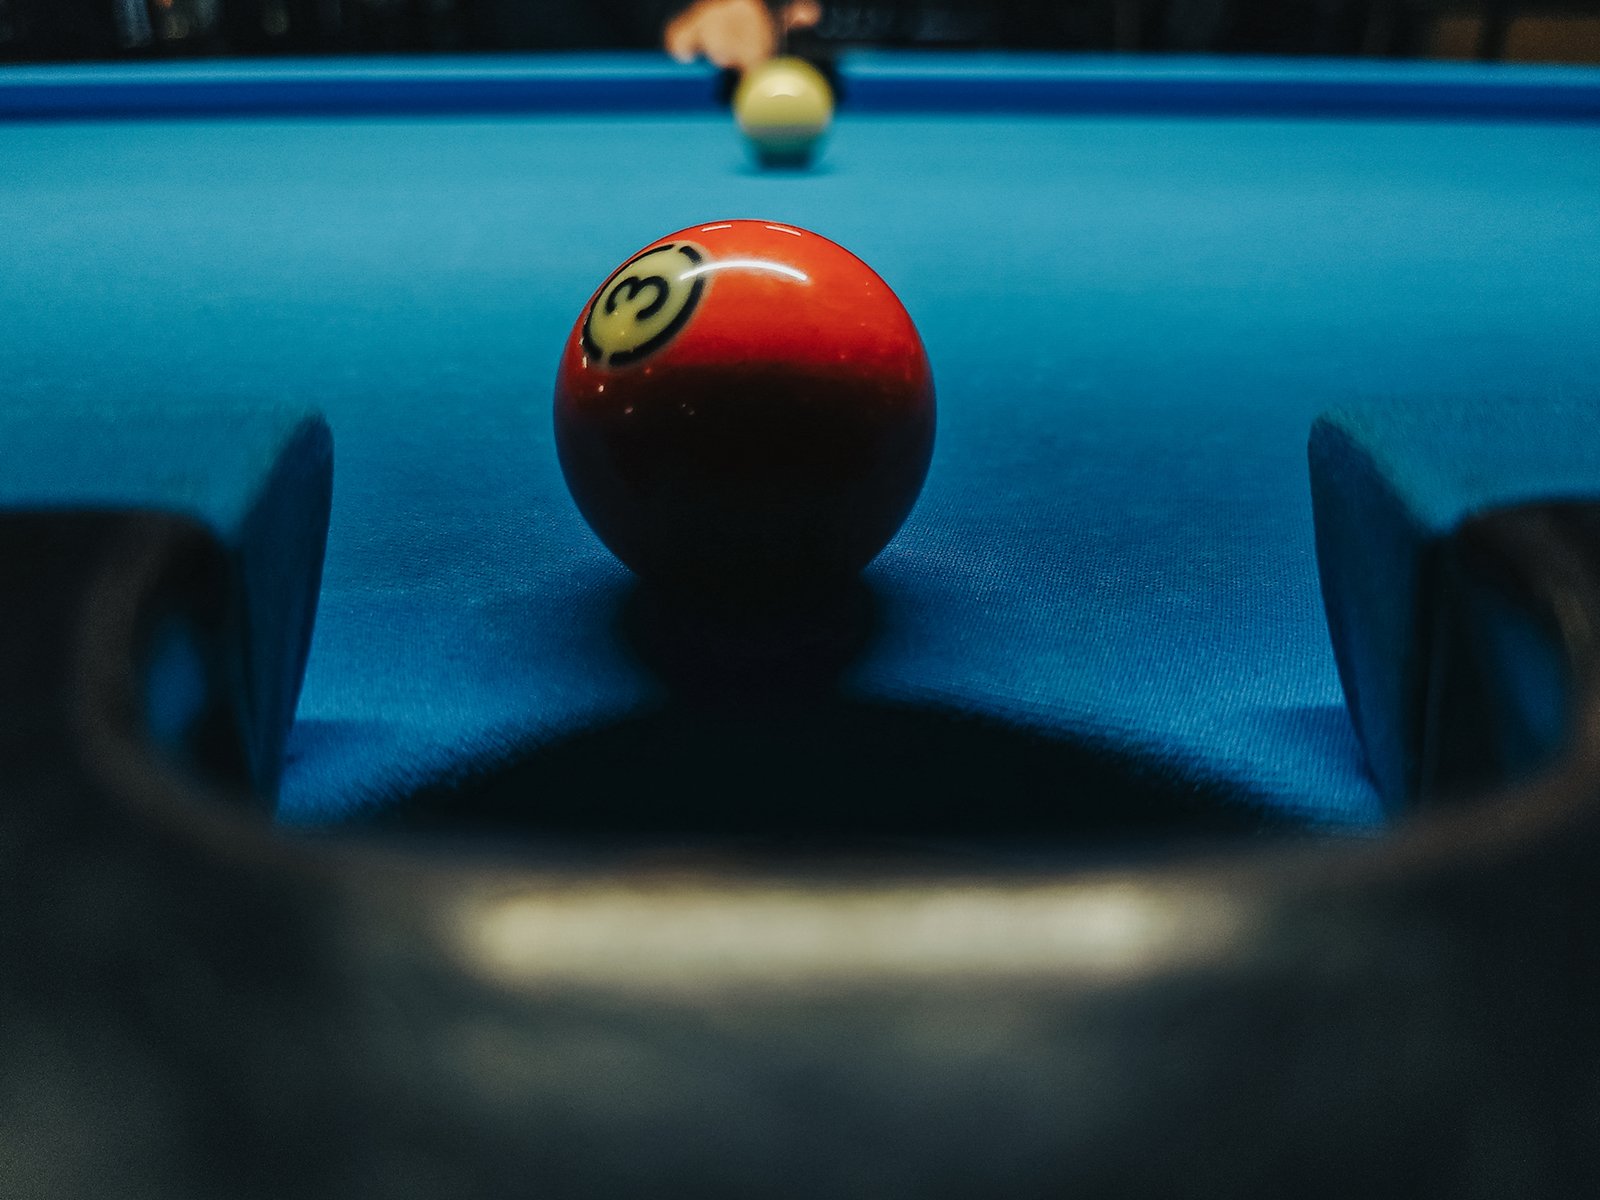 A close-up photo of a billiards table with a red number 3 ball near the pocket and a blurry white ball in the background, implying motion towards the red ball.